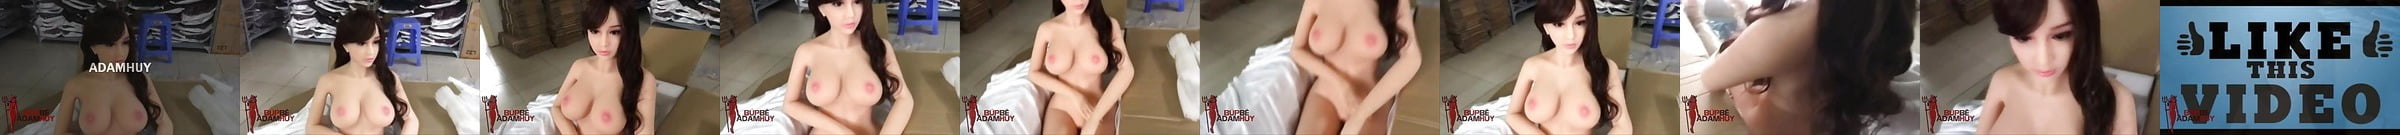 Adamhuy Com Unboxing Sex Doll Ds Nell 167cm Porn 93